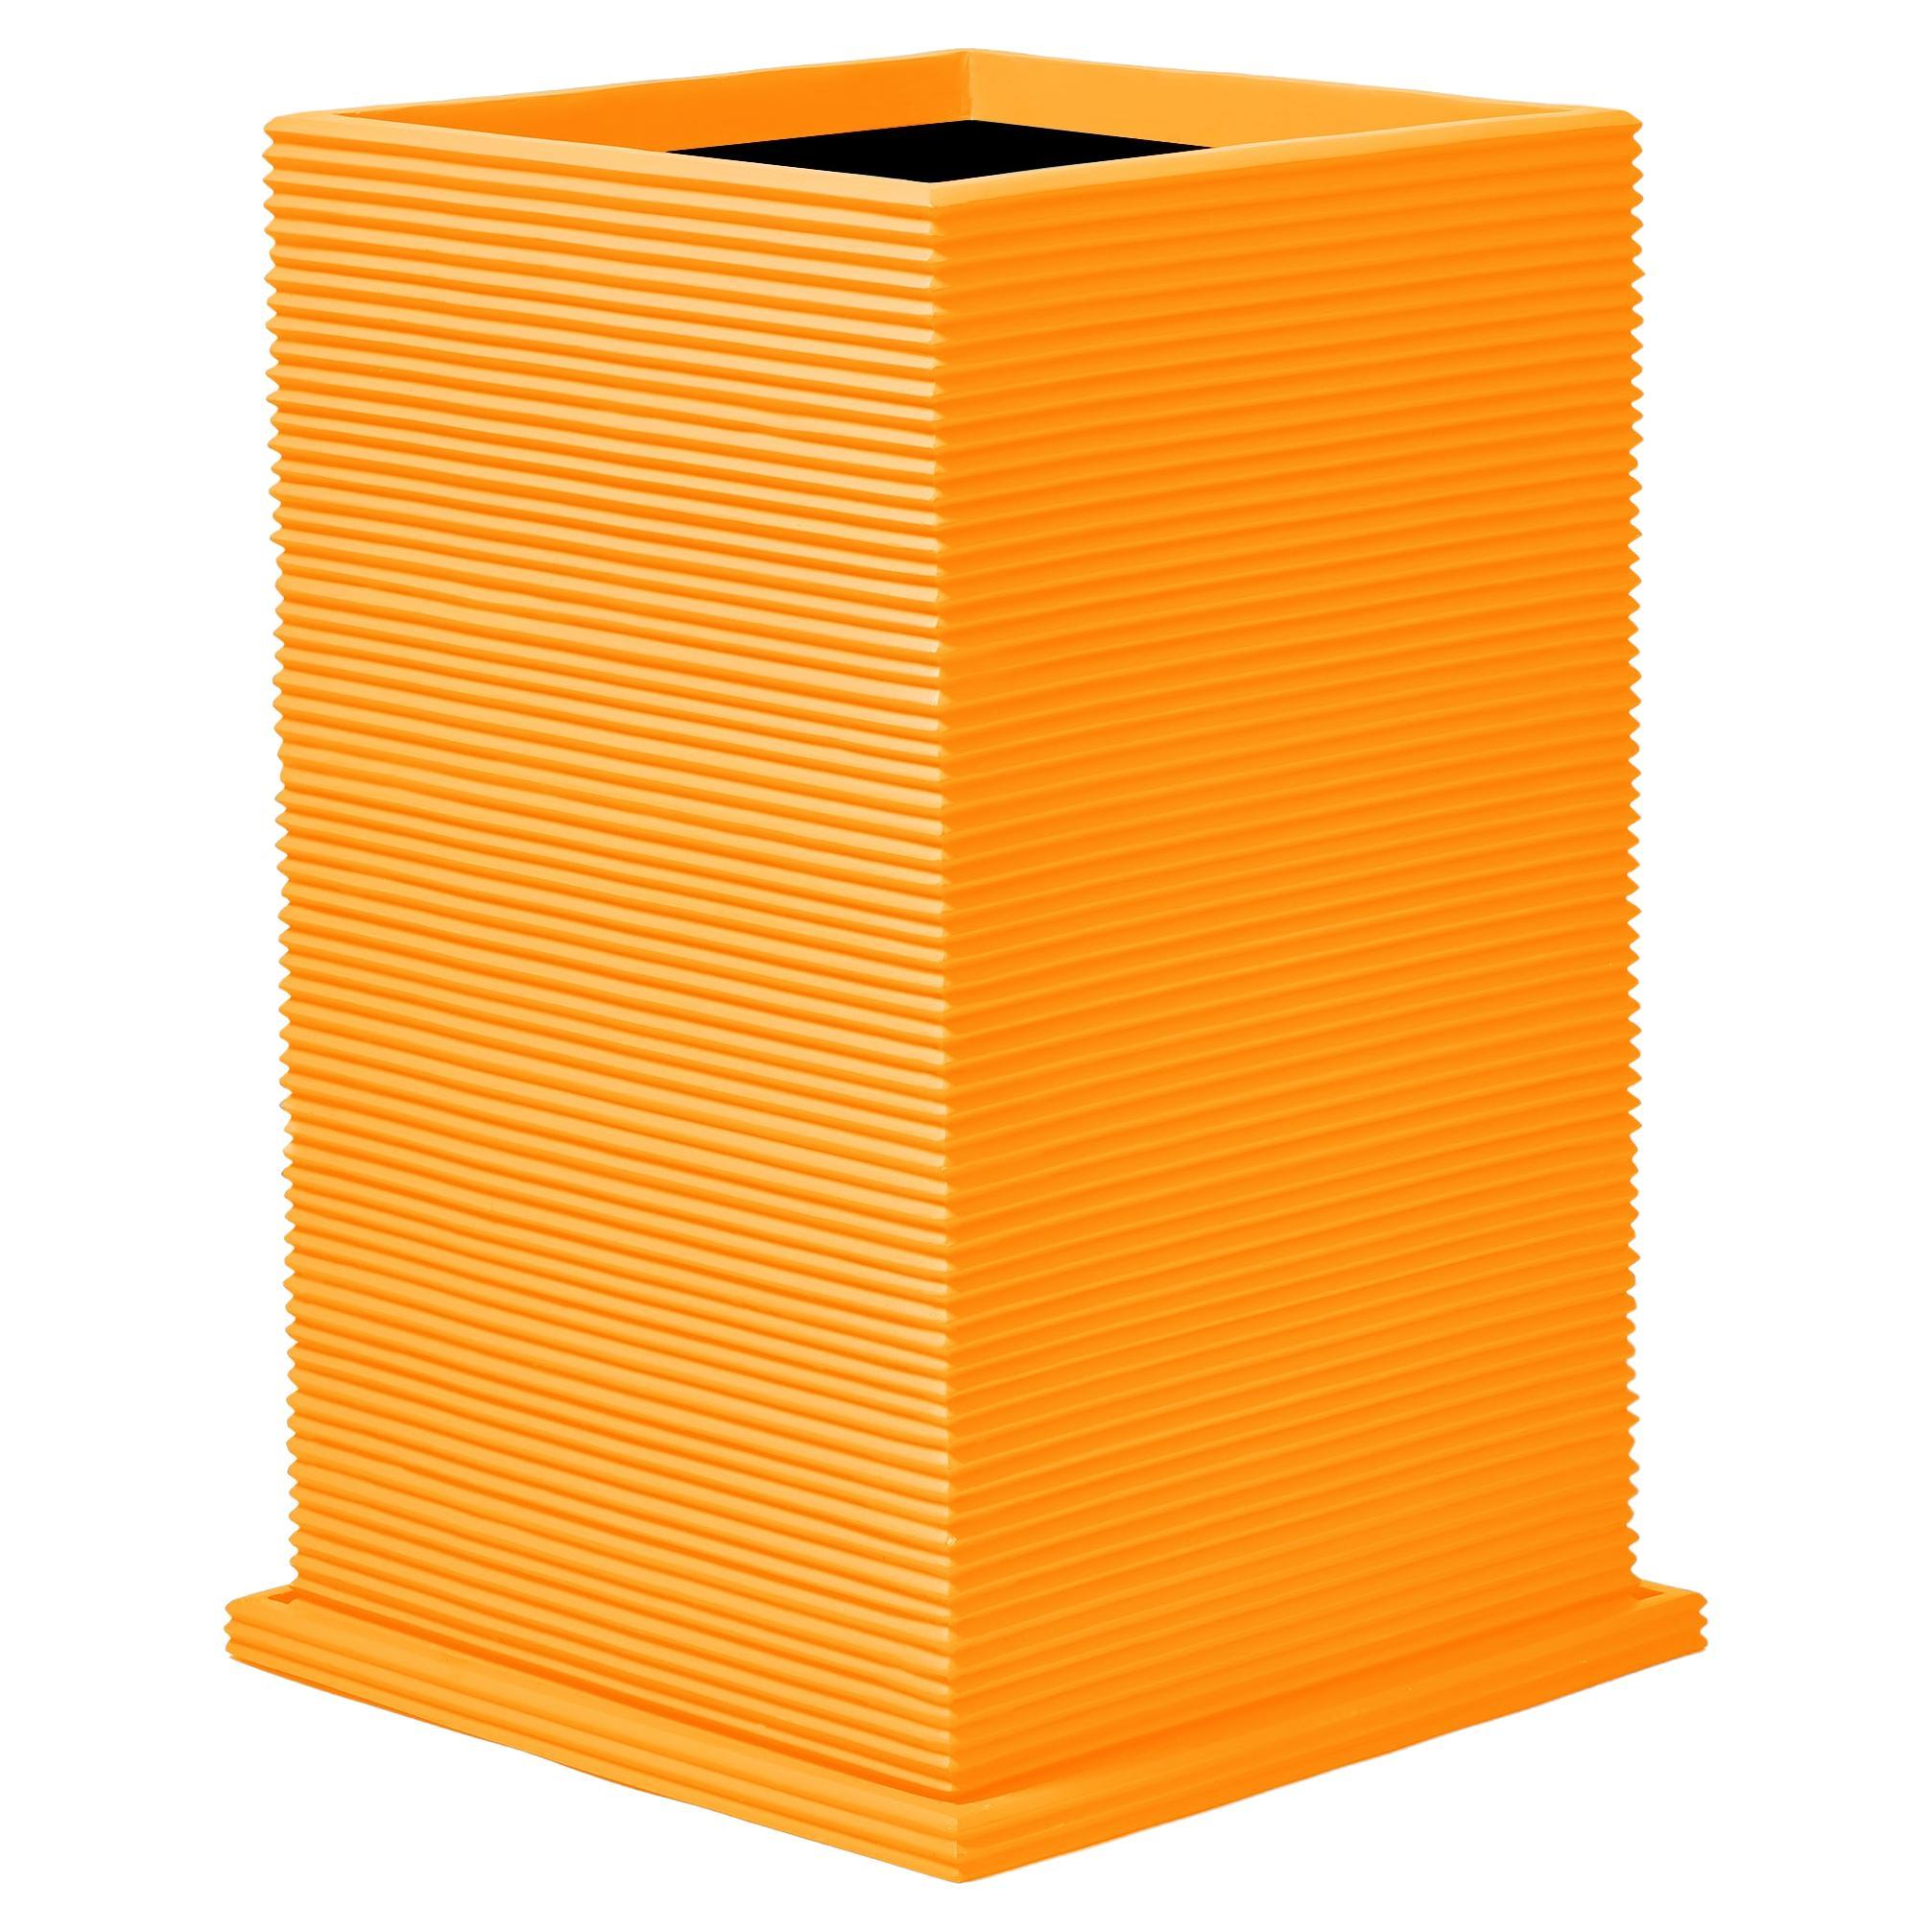 Oversize Tall Rectangular Planter 'Orange' by TFM, Rep by Tuleste Factory